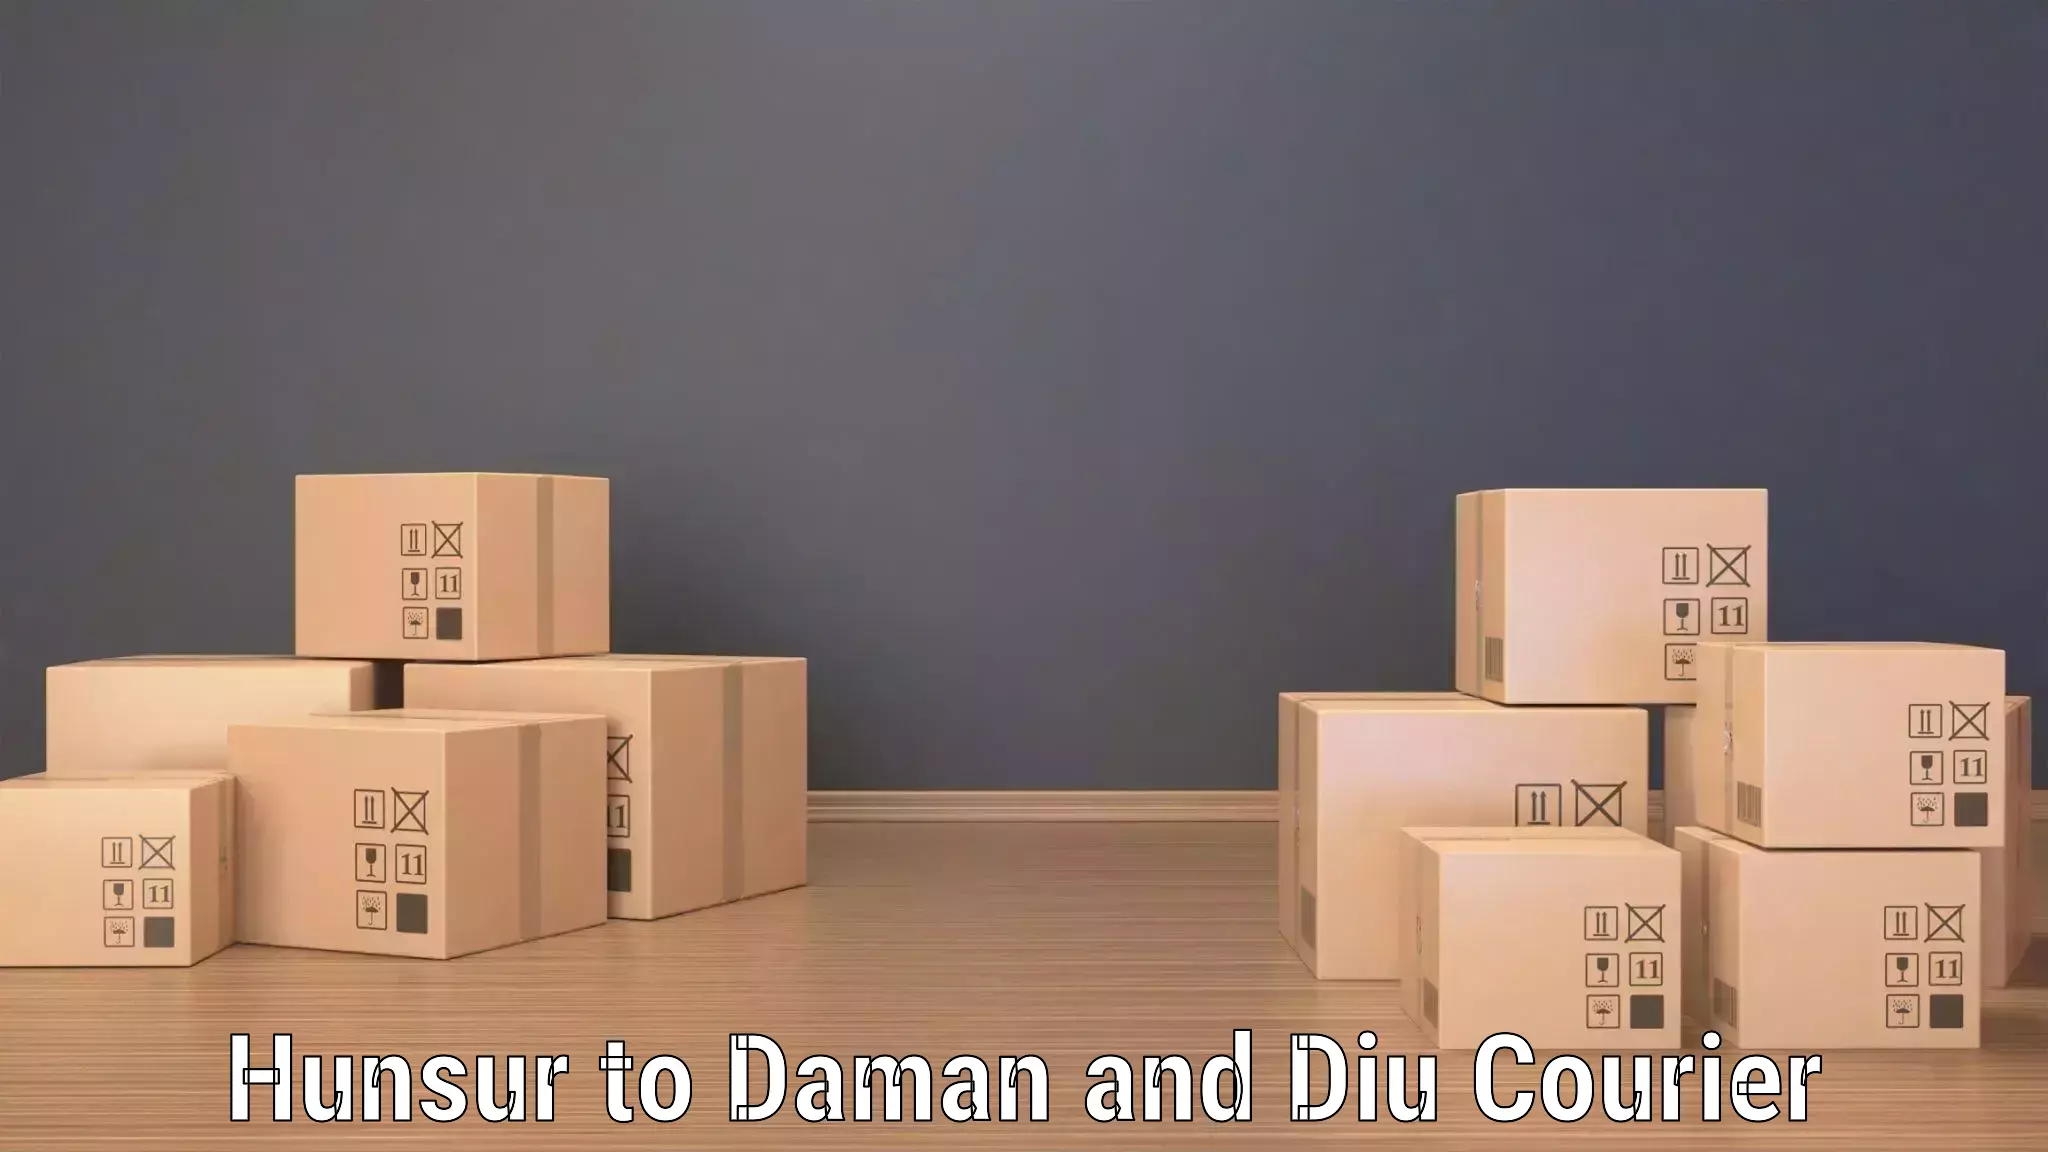 Next day courier Hunsur to Daman and Diu